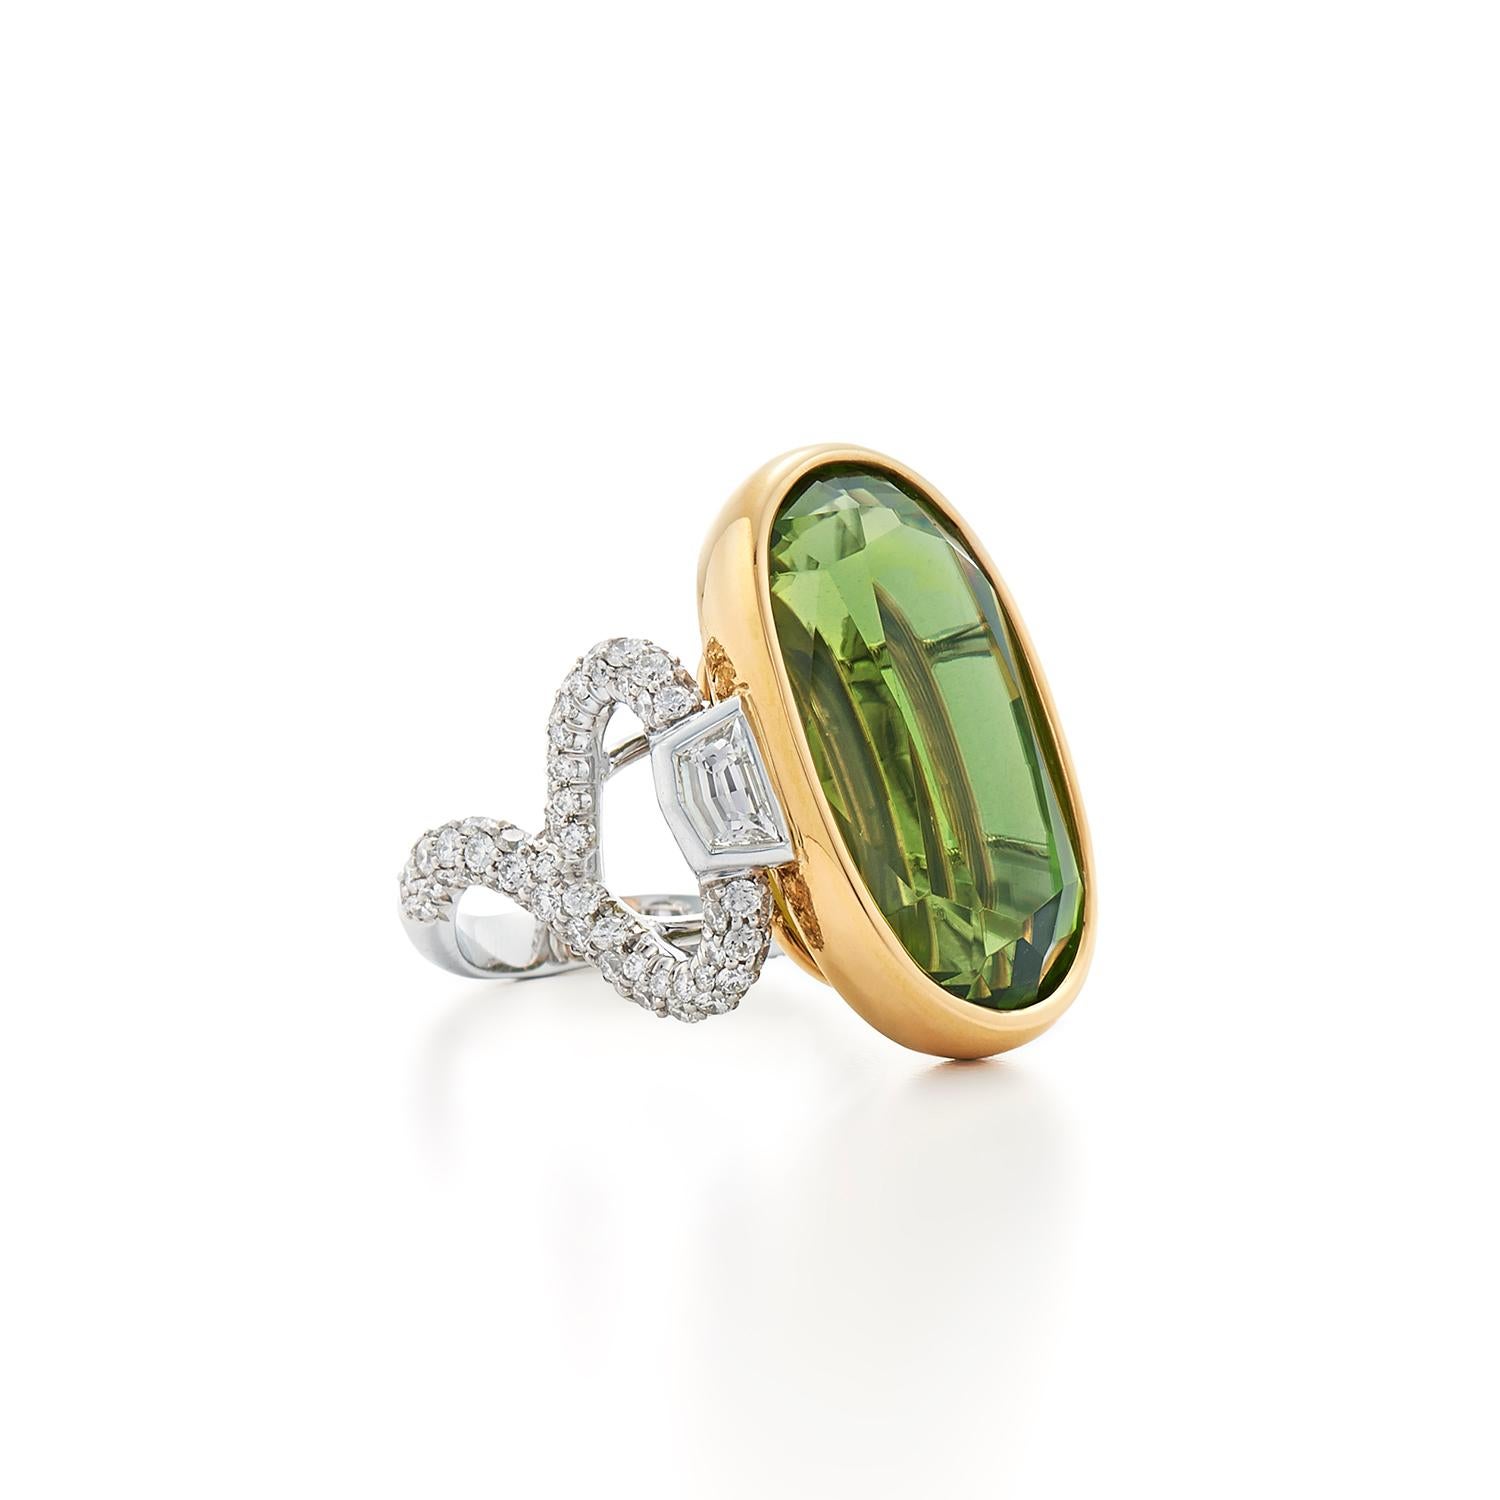 A fine oval peridot weighing 31.14 carats is set in a bezel of 18 karat yellow gold flanked with a pair of shield shape diamonds totaling approximately 0.67 carat atop a curving shank set with round diamonds totaling approximately 1.91 carats